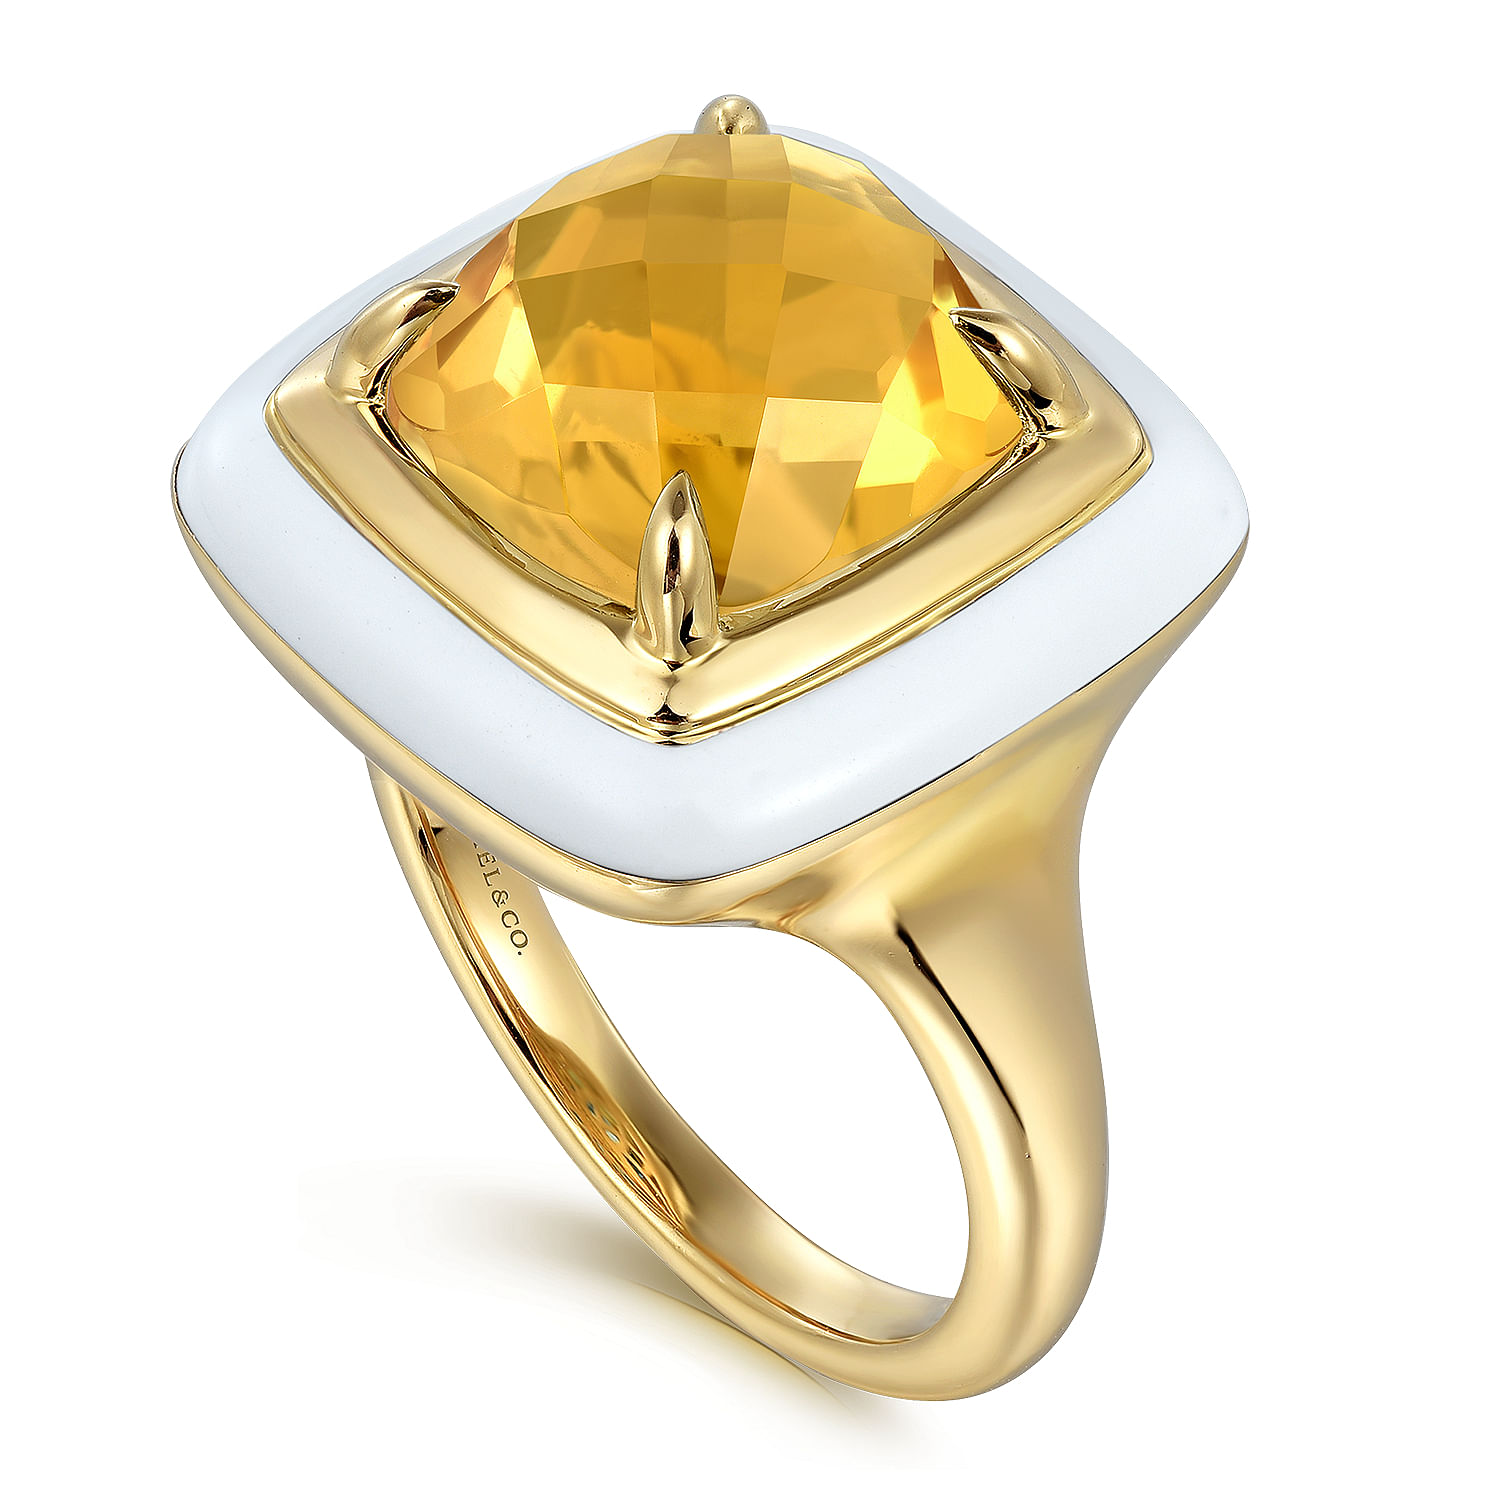 14K Yellow Gold Citrine Cushion Cut Ladies Ring With Flower Pattern J-Back and White Enamel